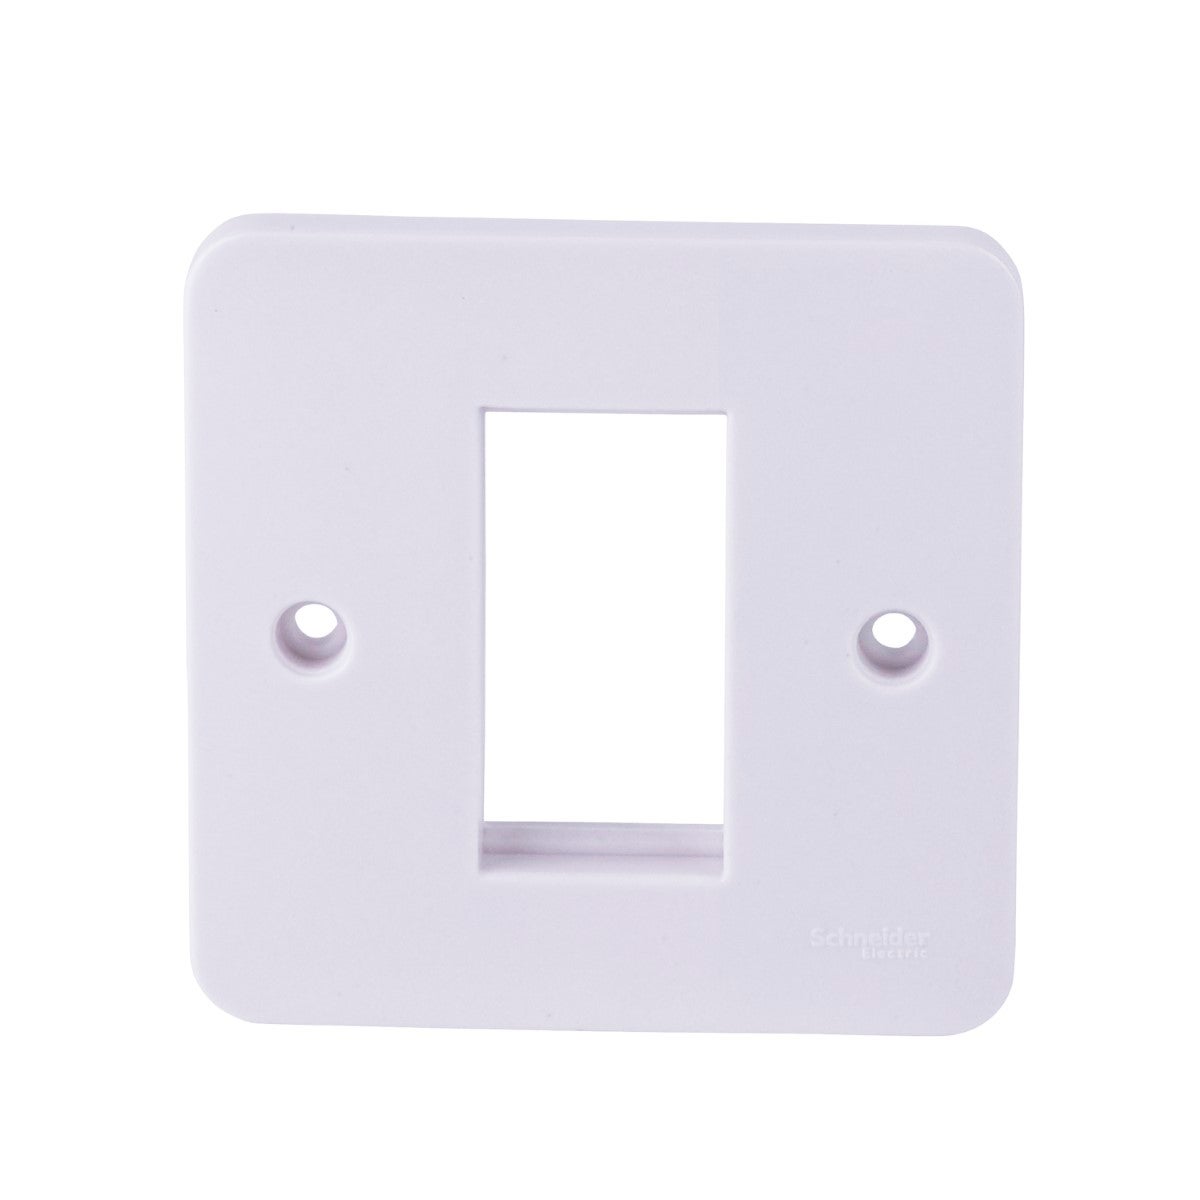 Lisse - white moulded - euro plate - 1 module - 1 gang